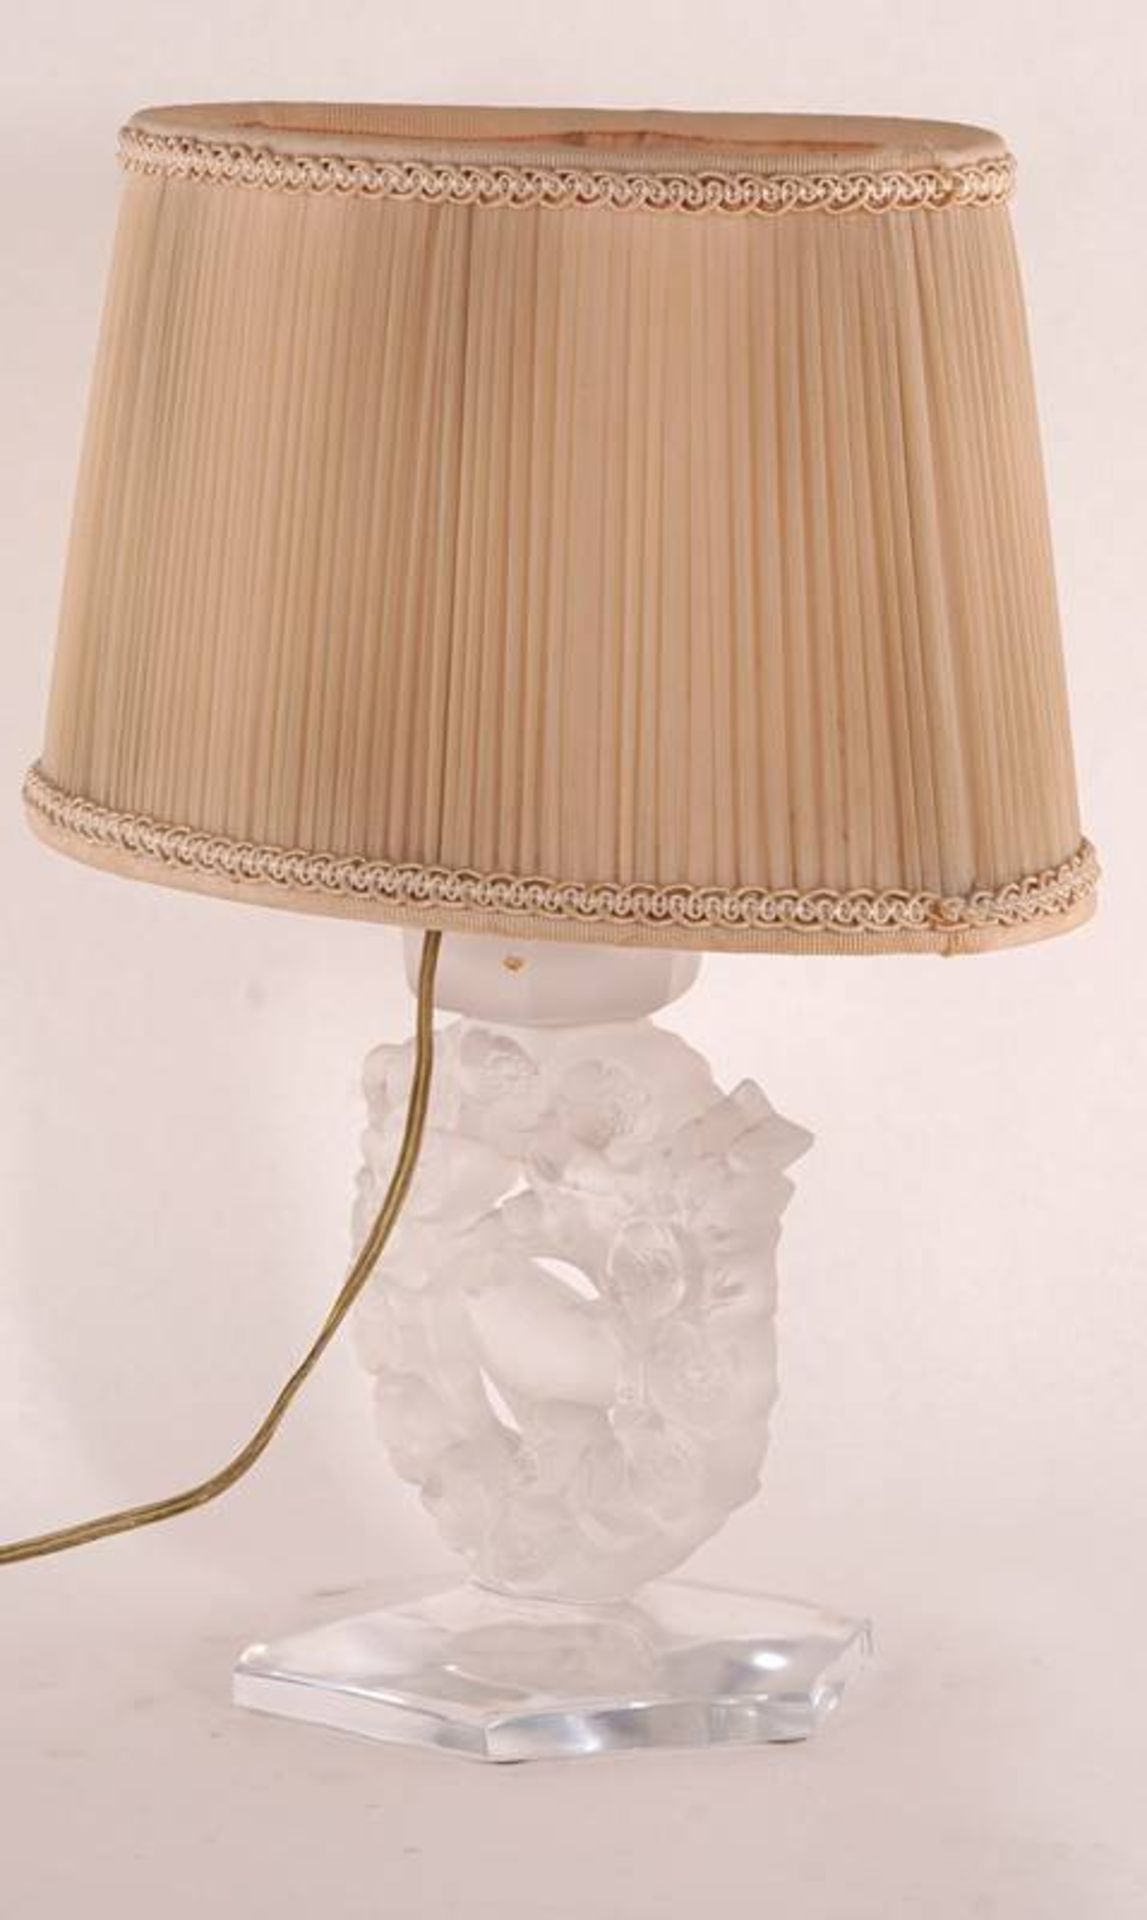 Lalique table lamp - Image 2 of 4